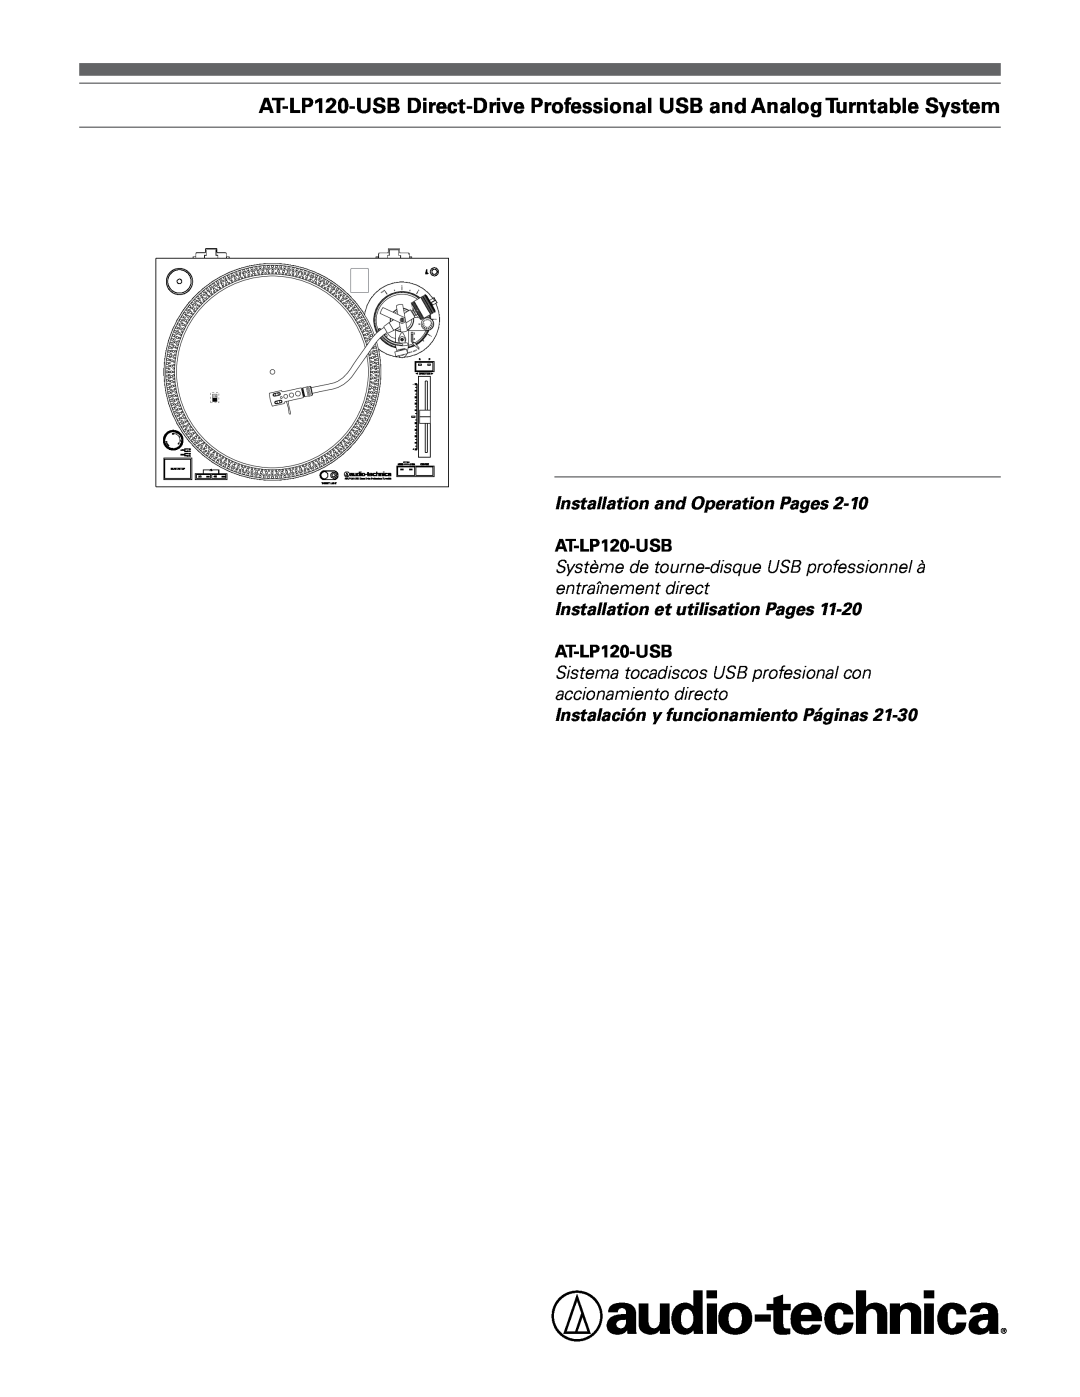 Audio-Technica AT-LP120-USB manual Installation and Operation Pages, Installation et utilisation Pages 